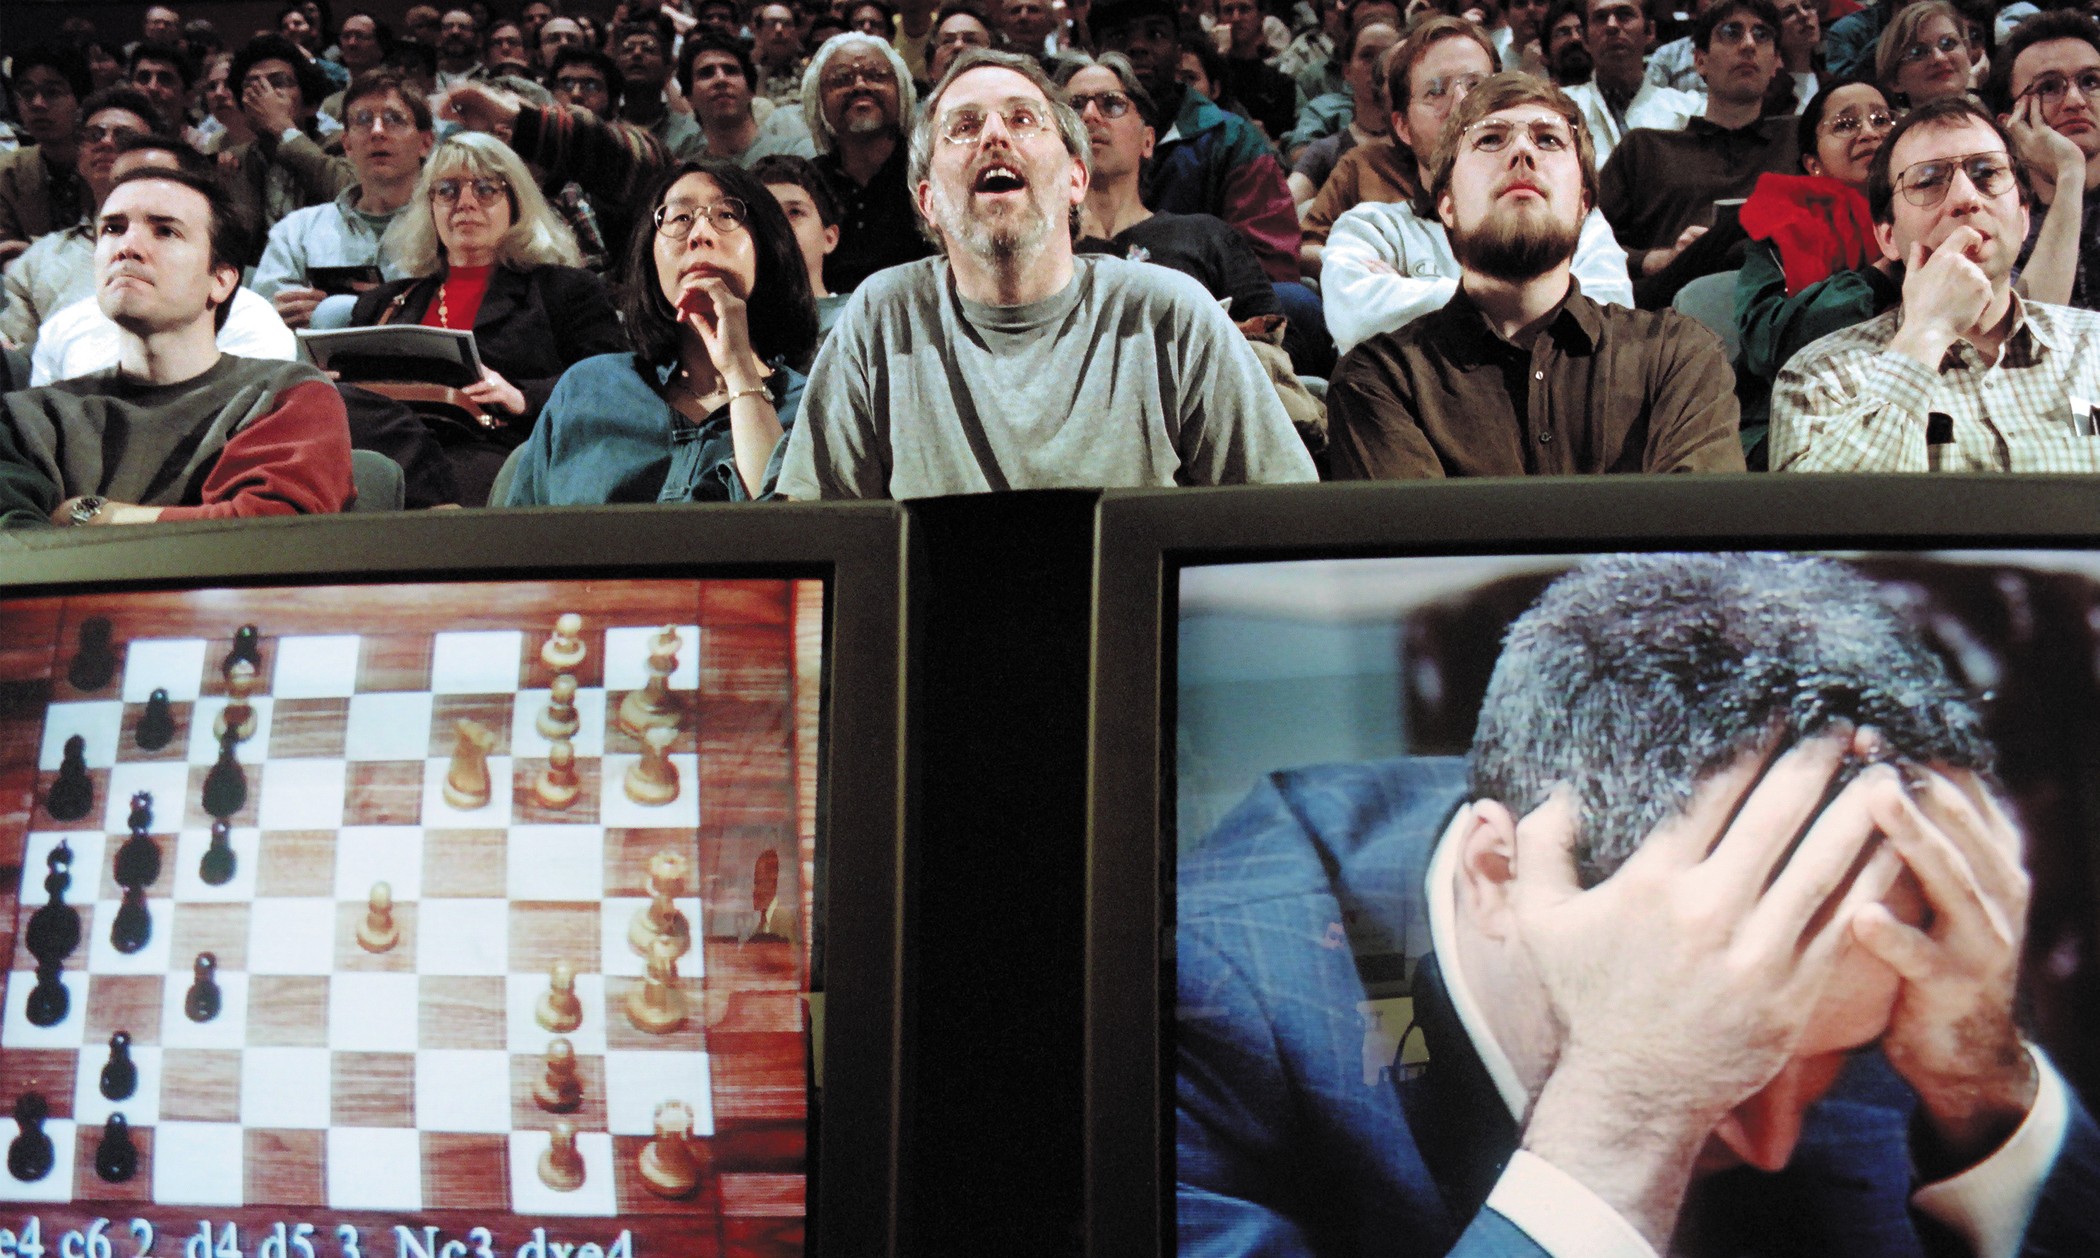 AI Analyzes Chess Commentary to Learn to Play Chess